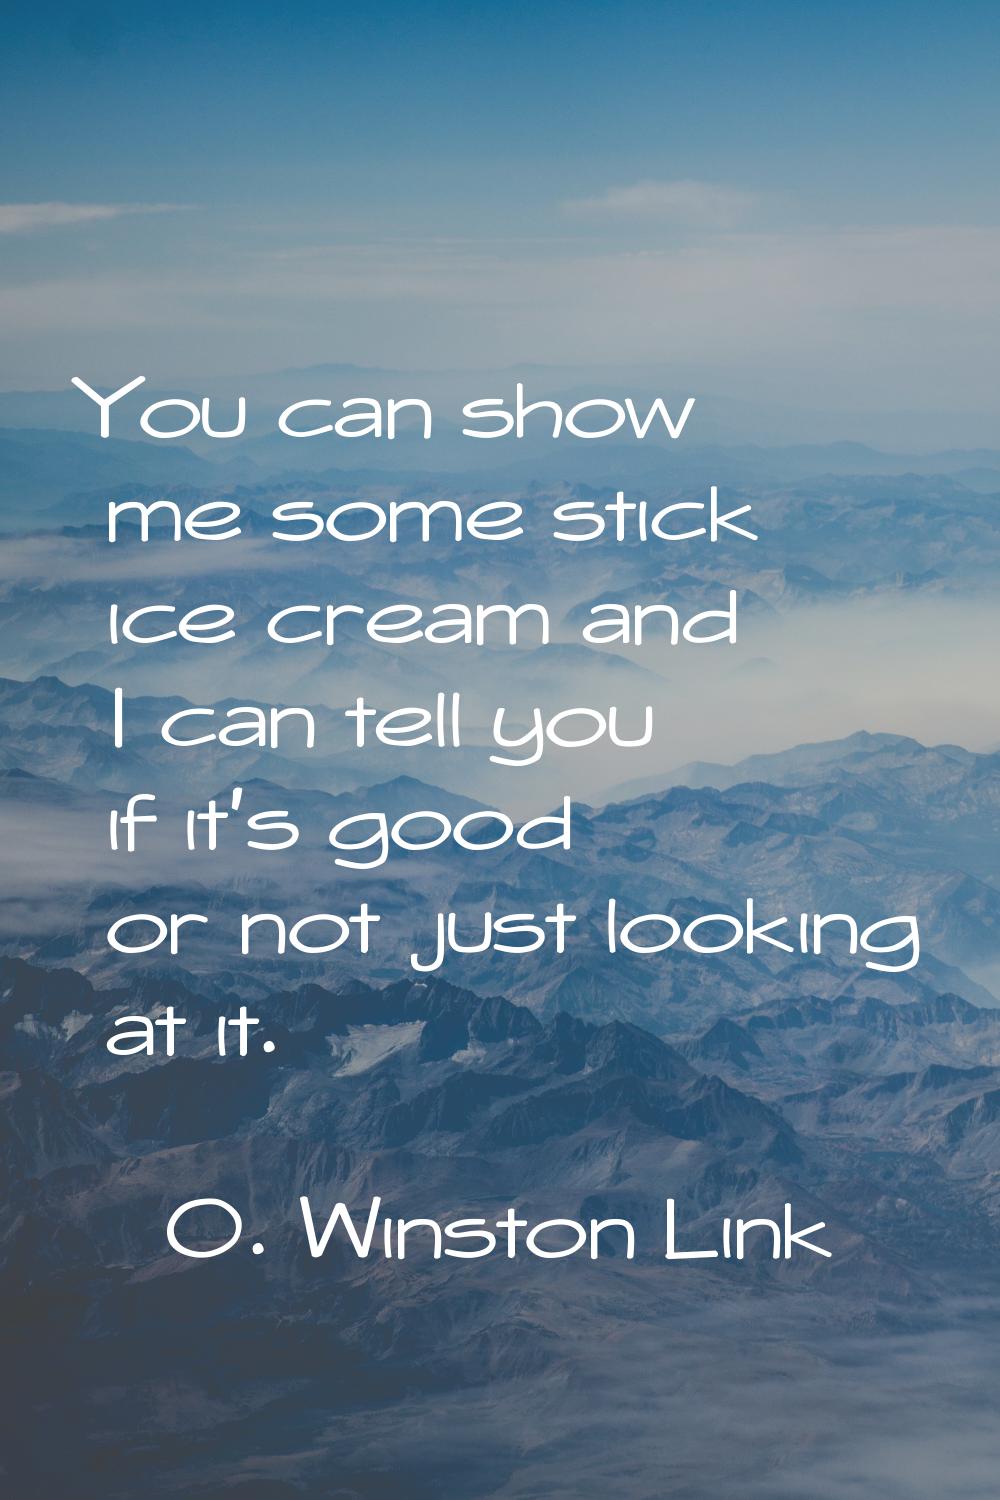 You can show me some stick ice cream and I can tell you if it's good or not just looking at it.